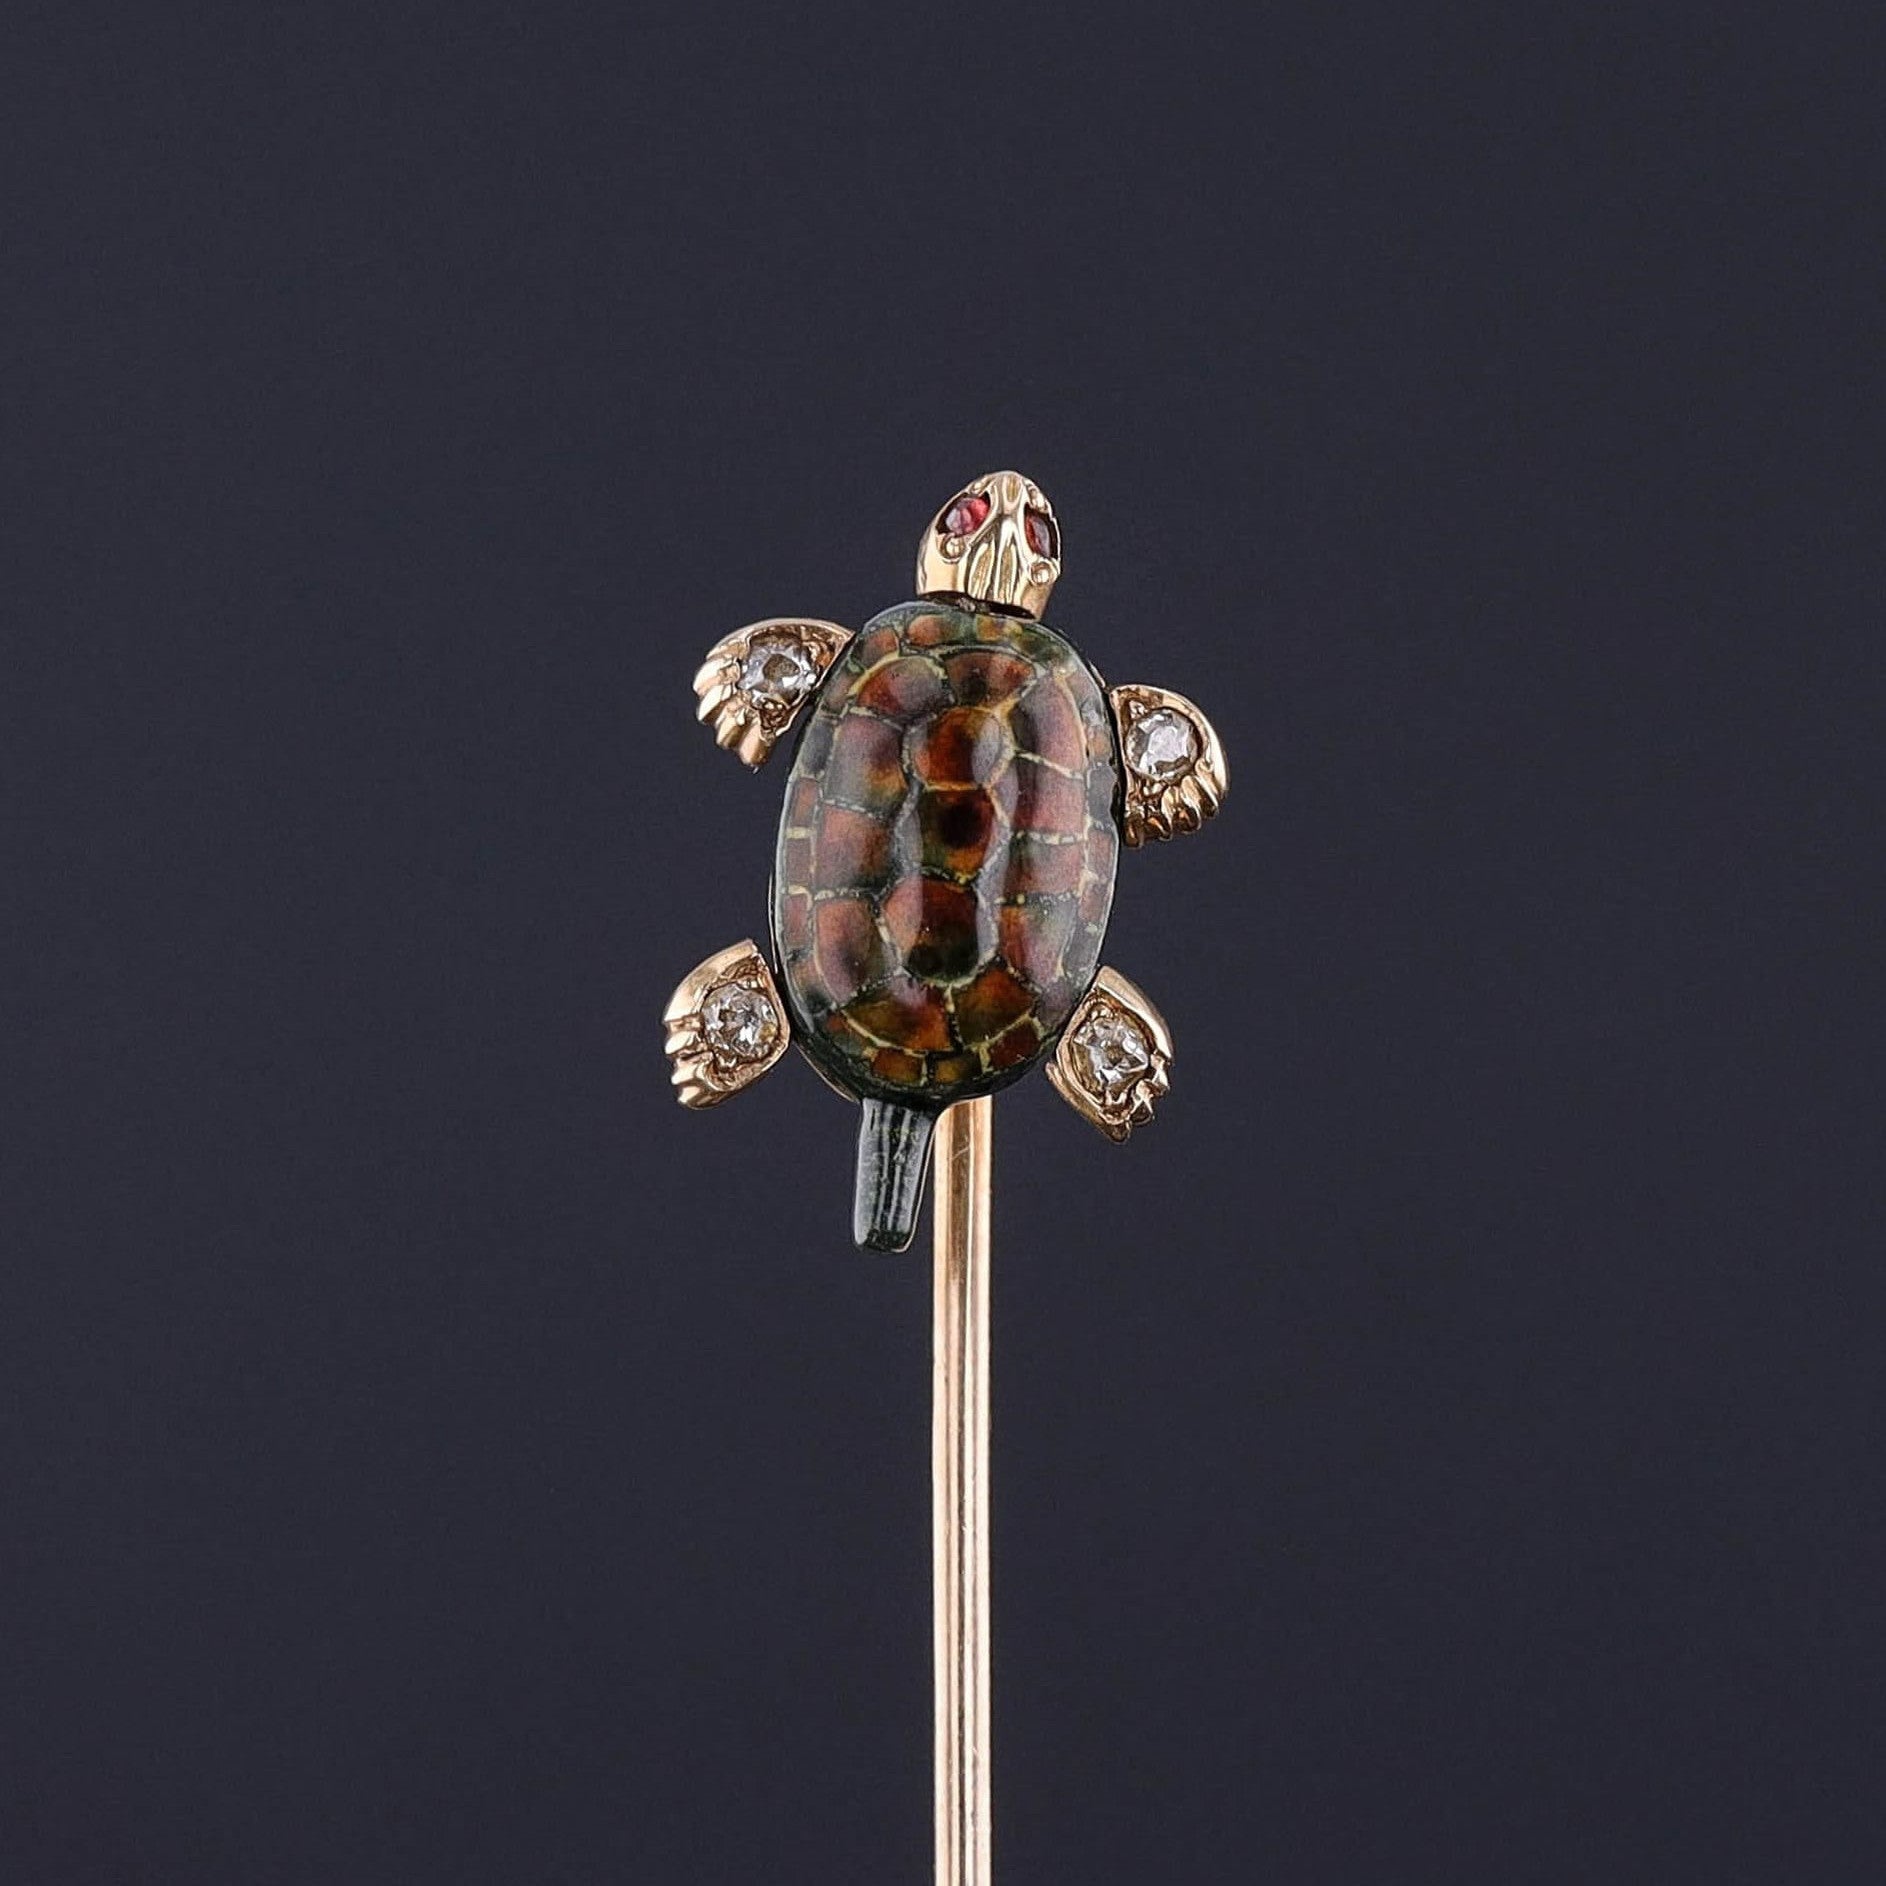 An exceptional antique stickpin with moveable feet and a moveable head. The feet are accented with diamonds and the eyes are garnets. The shell is finely done enamel and the entire pin is 14k gold.